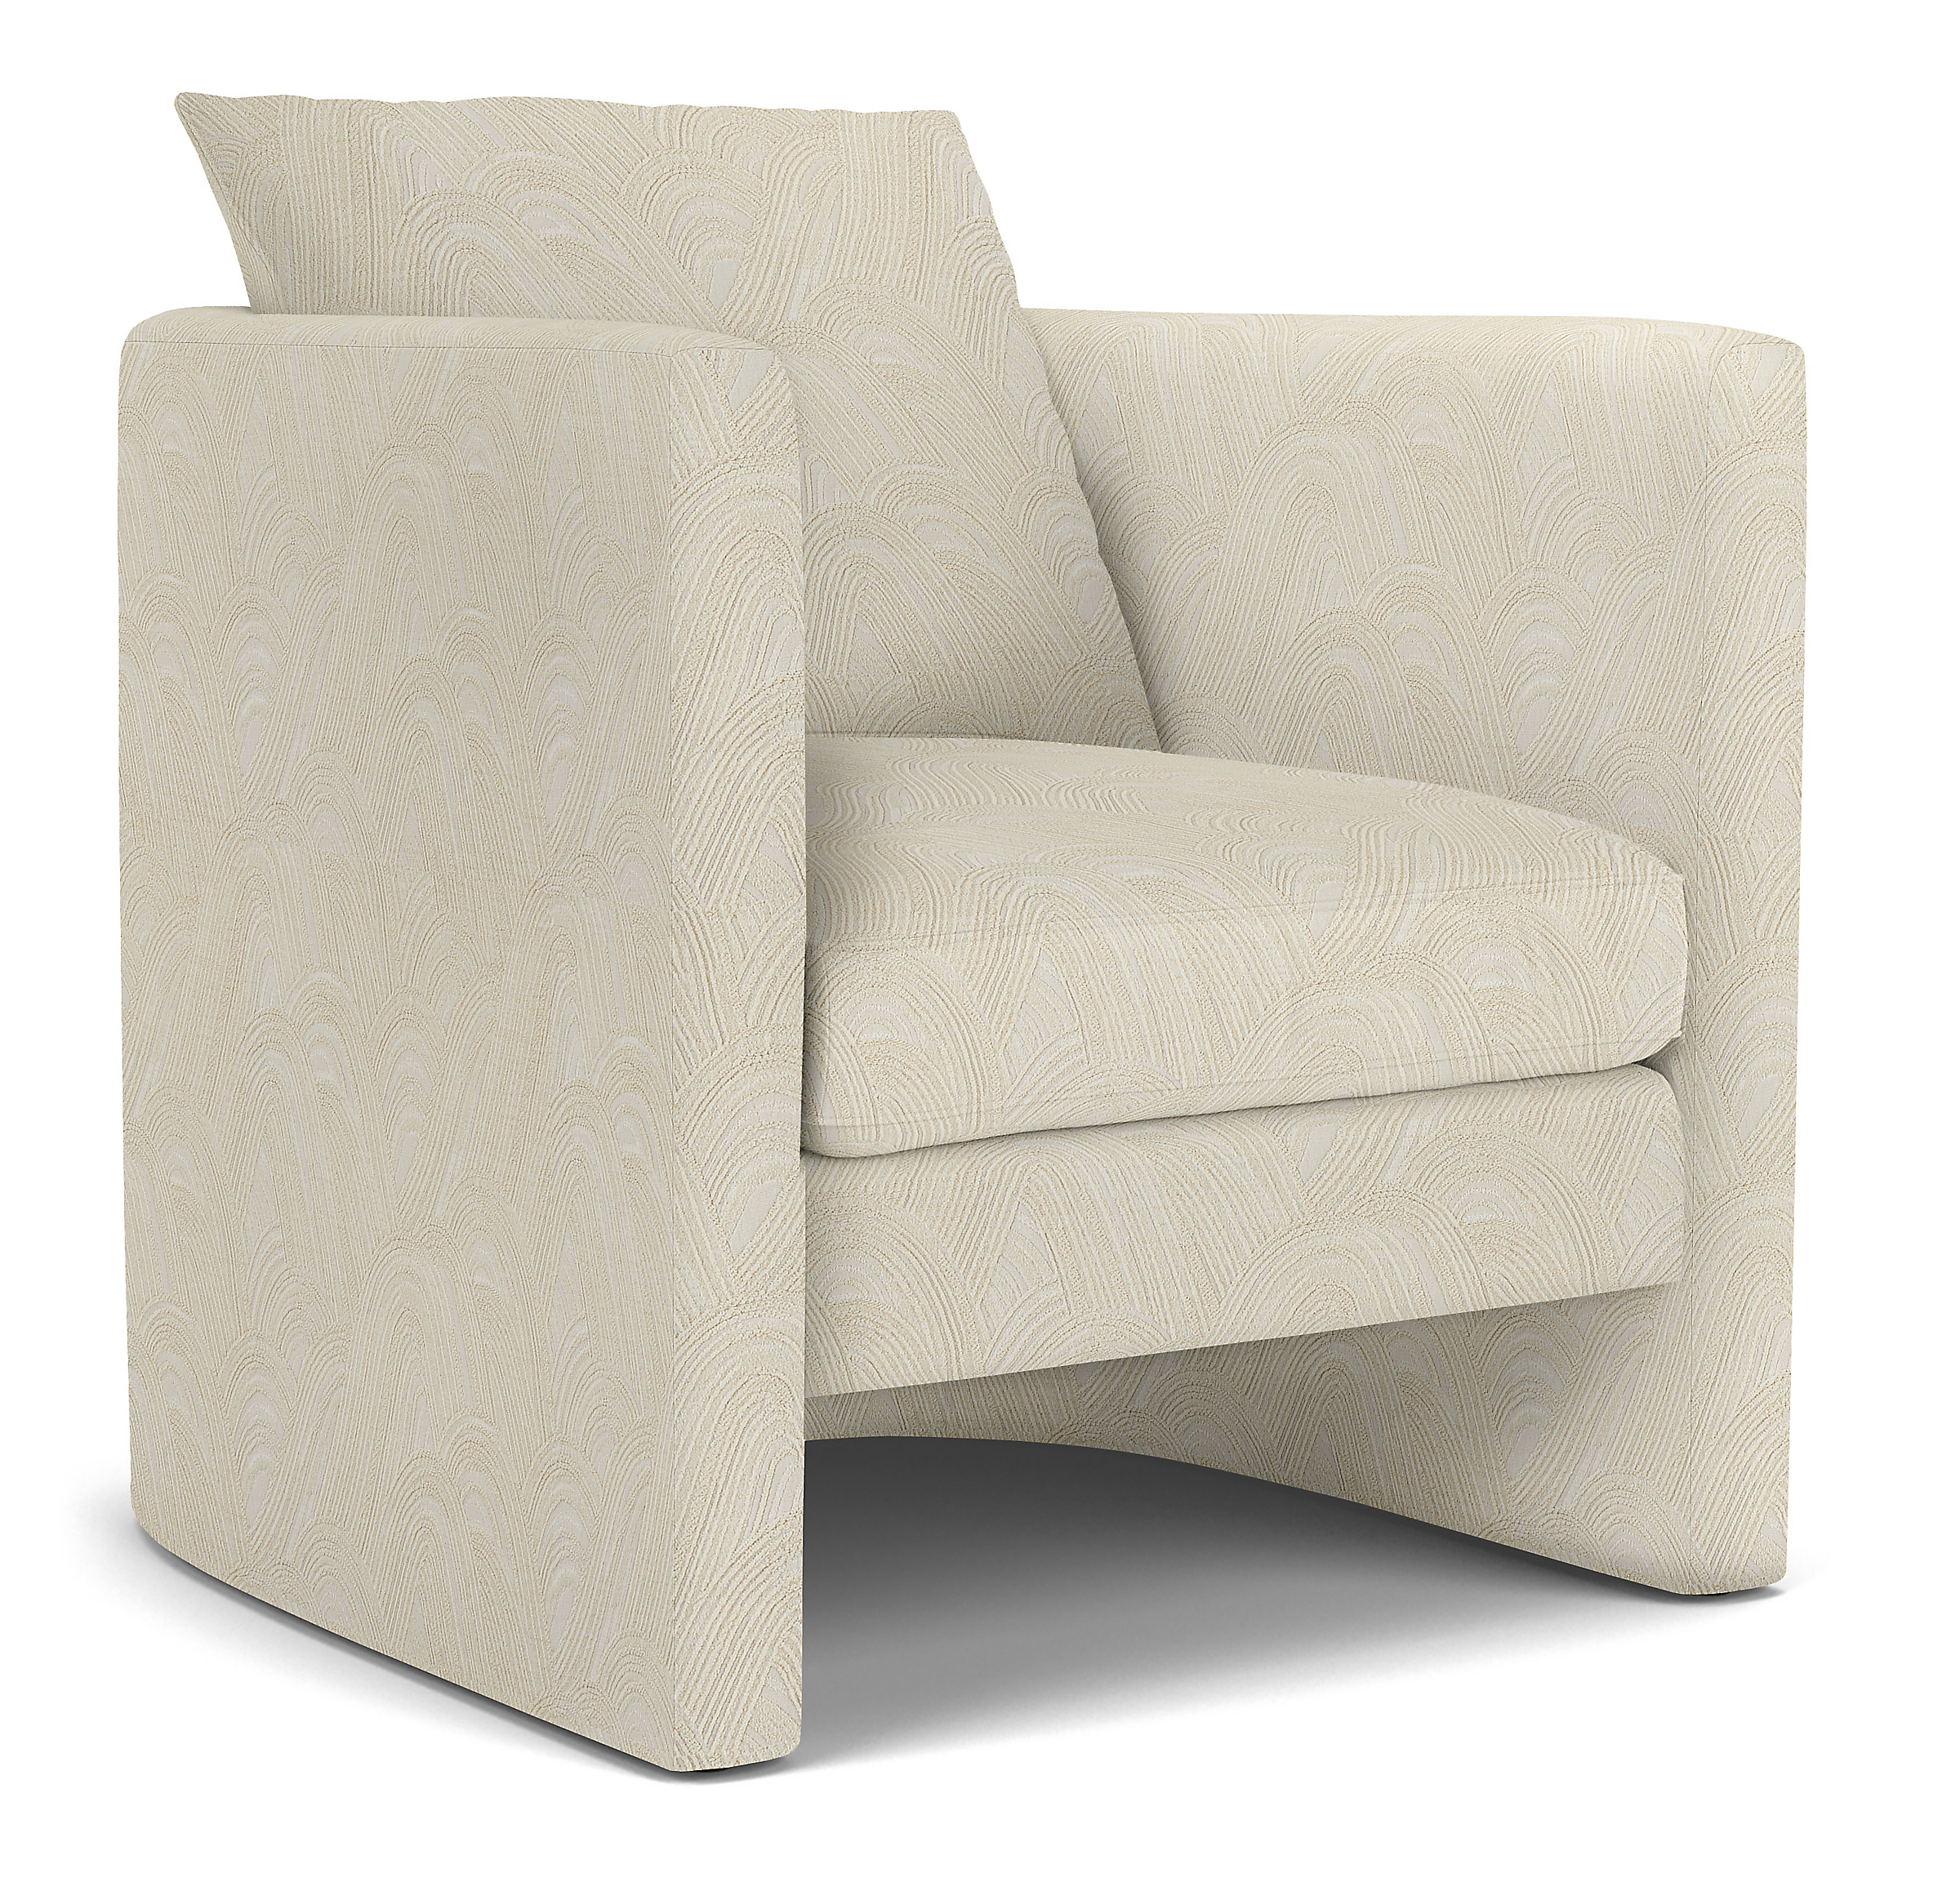 Silva Chair in Noloni Ivory